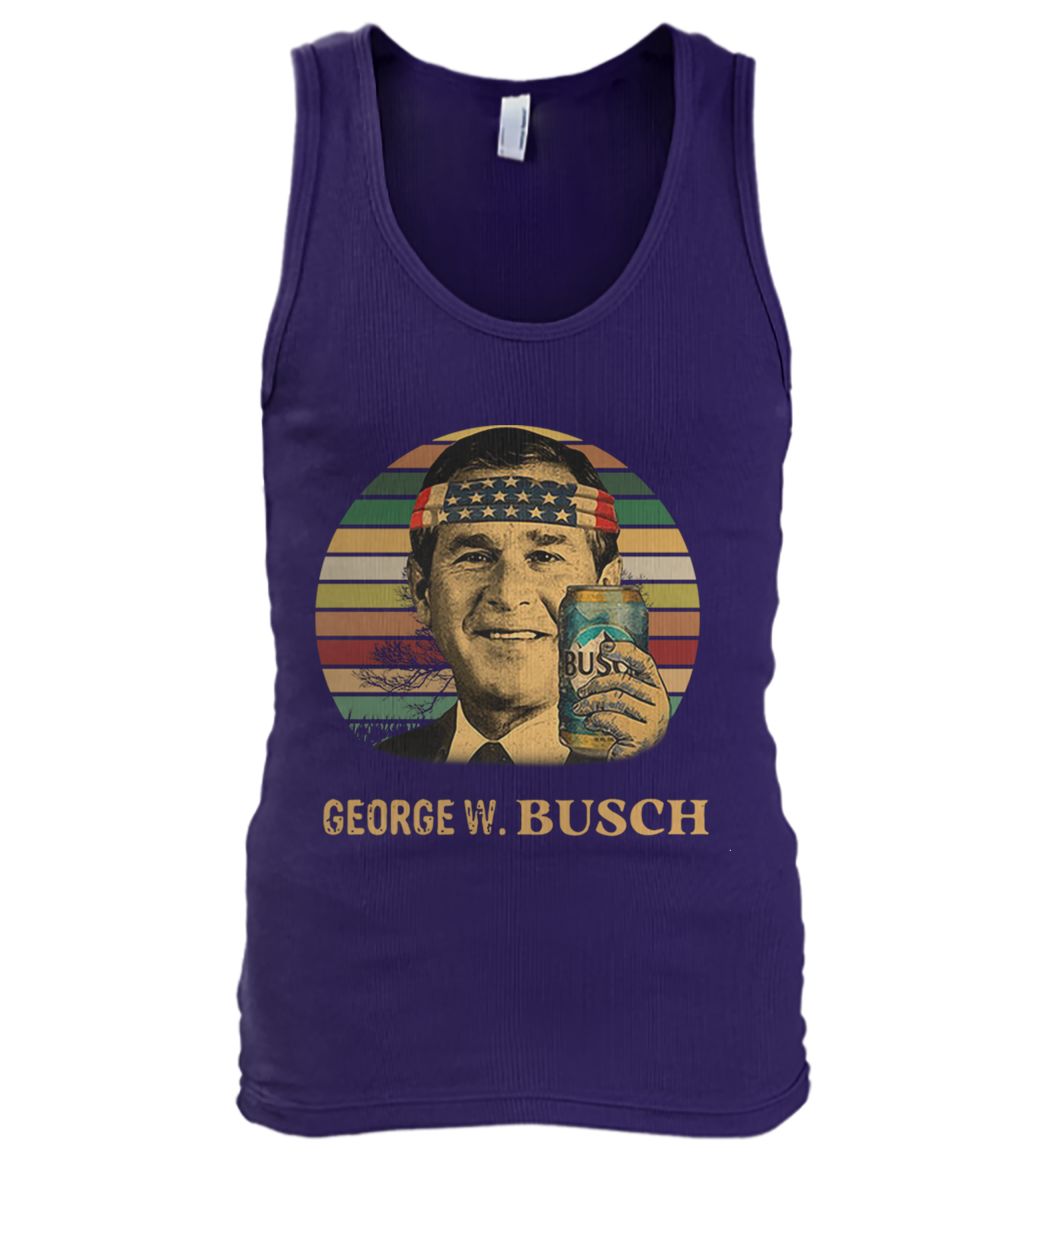 Vintage George W Busch light independence day men's tank top